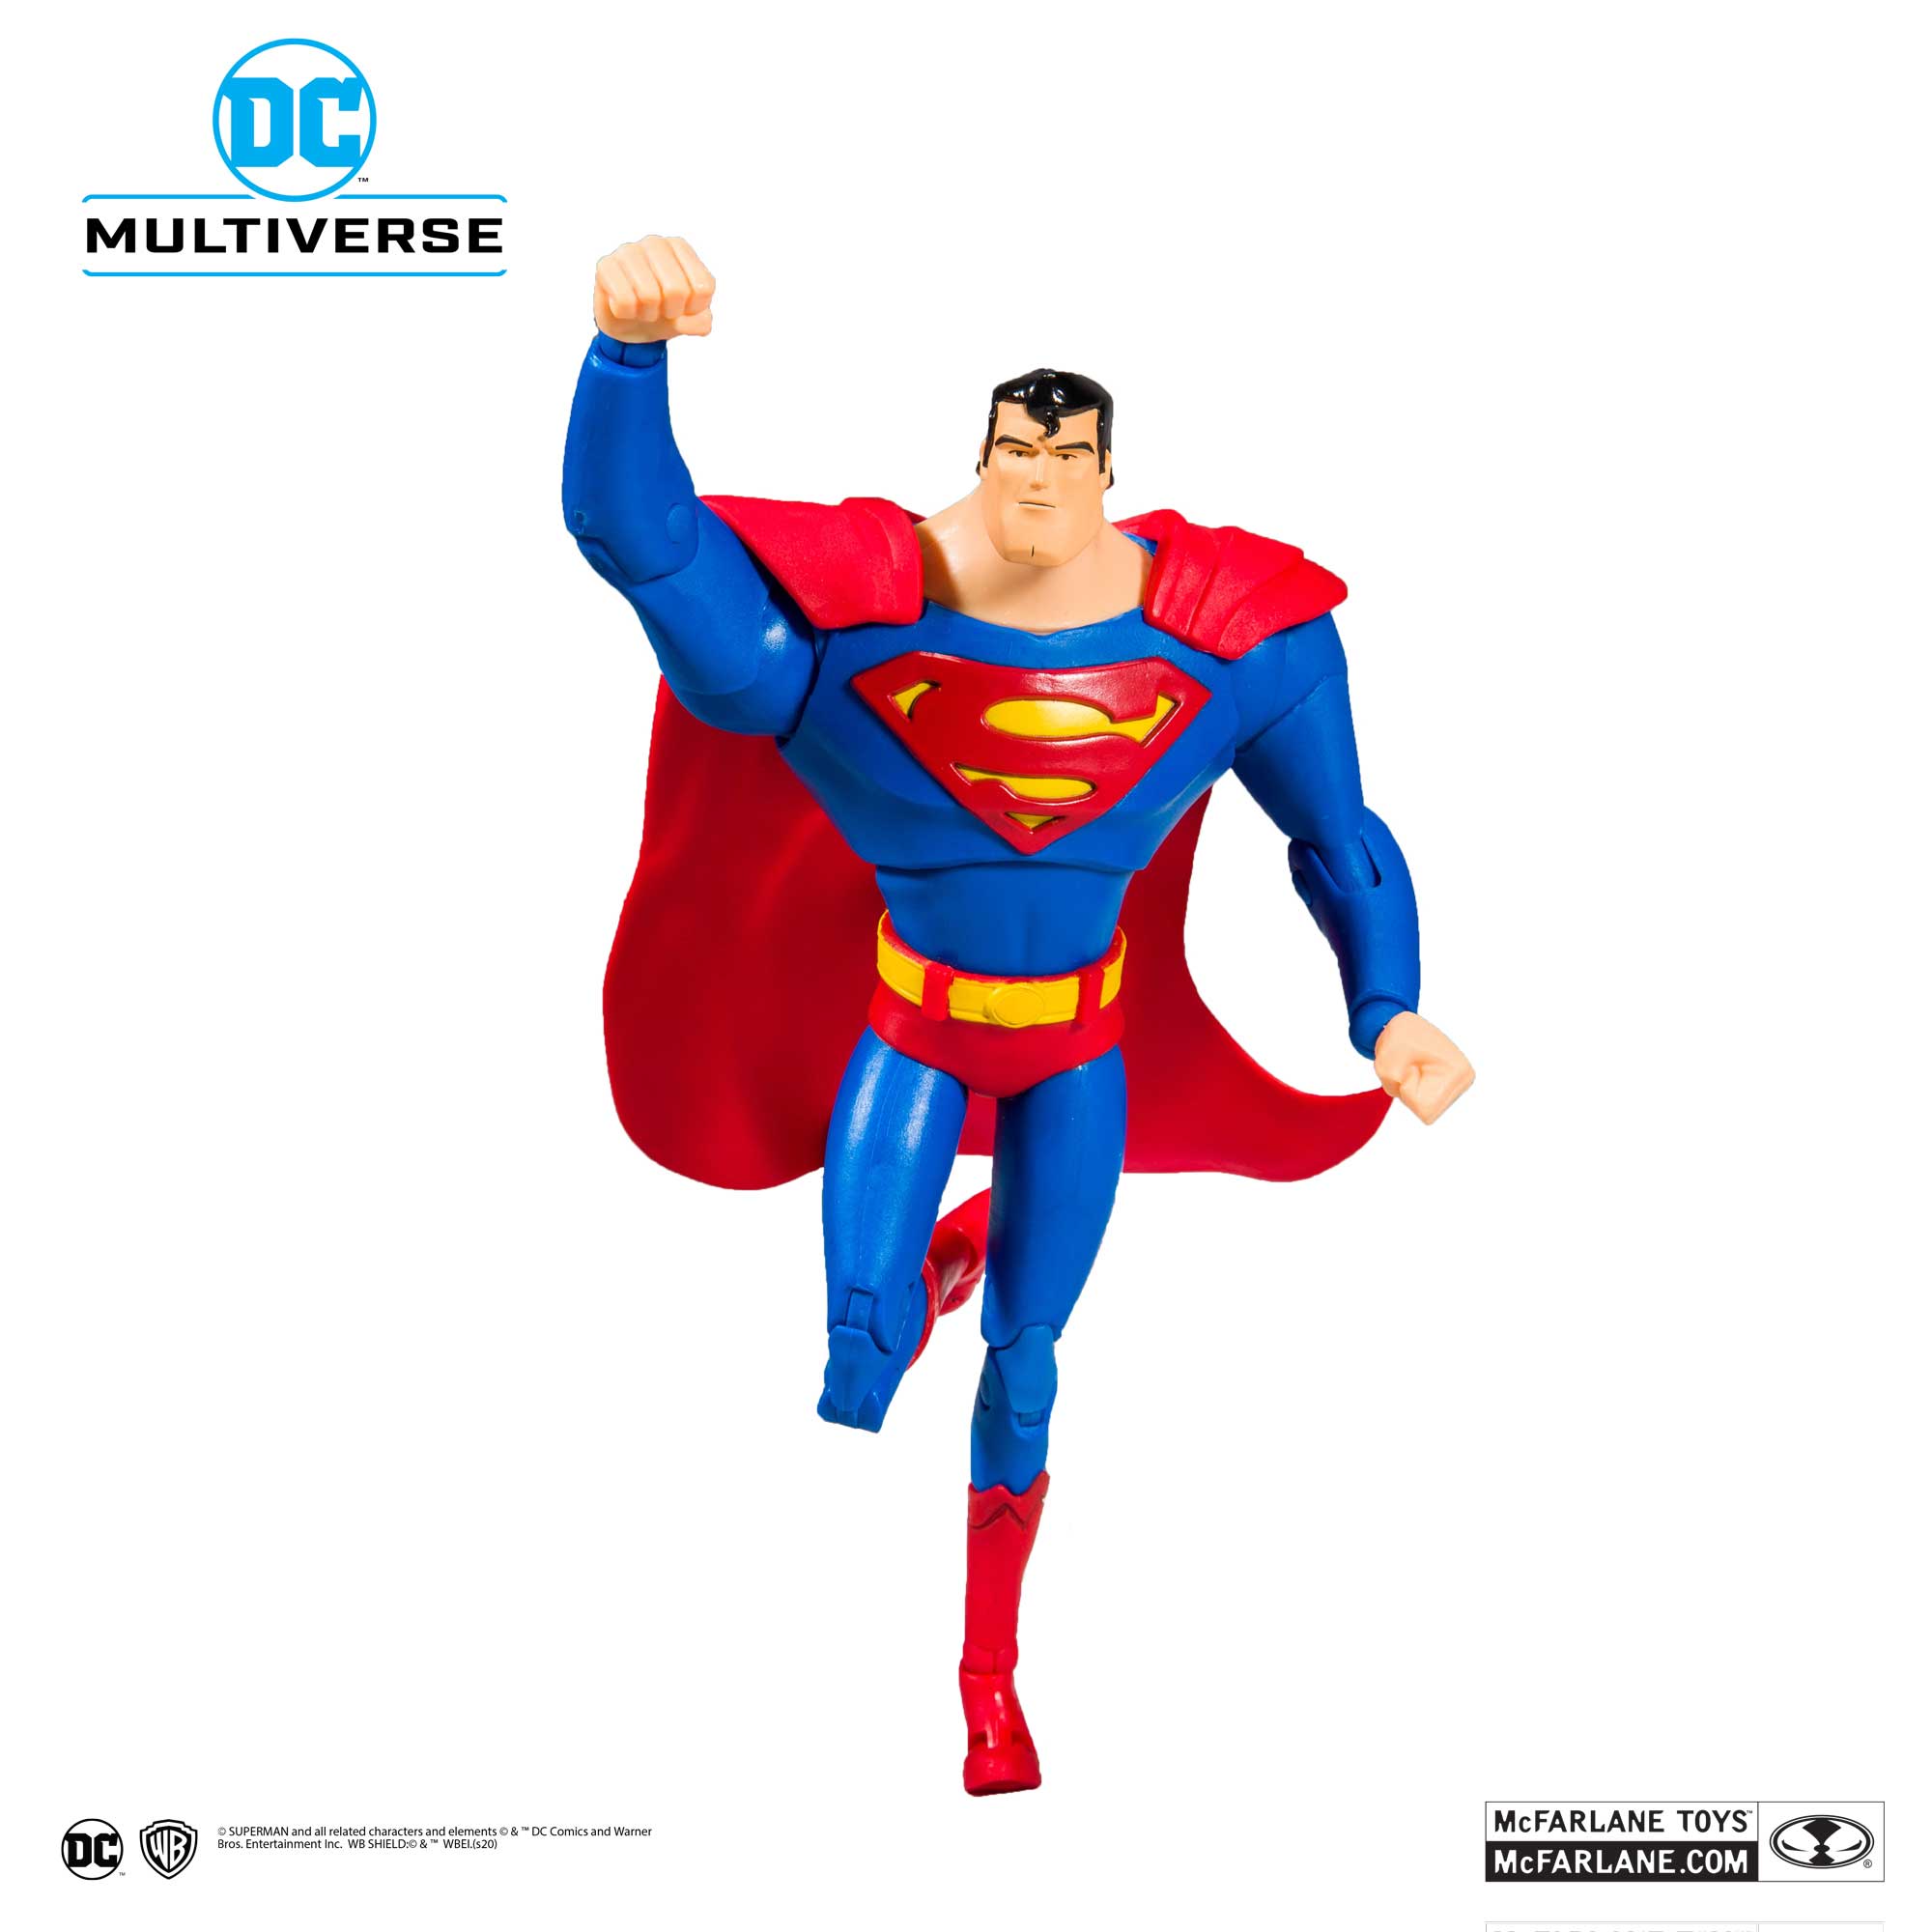 DC Multiverse Superman Animated Series Action Figure McFarlane Toys 2020 for sale online 